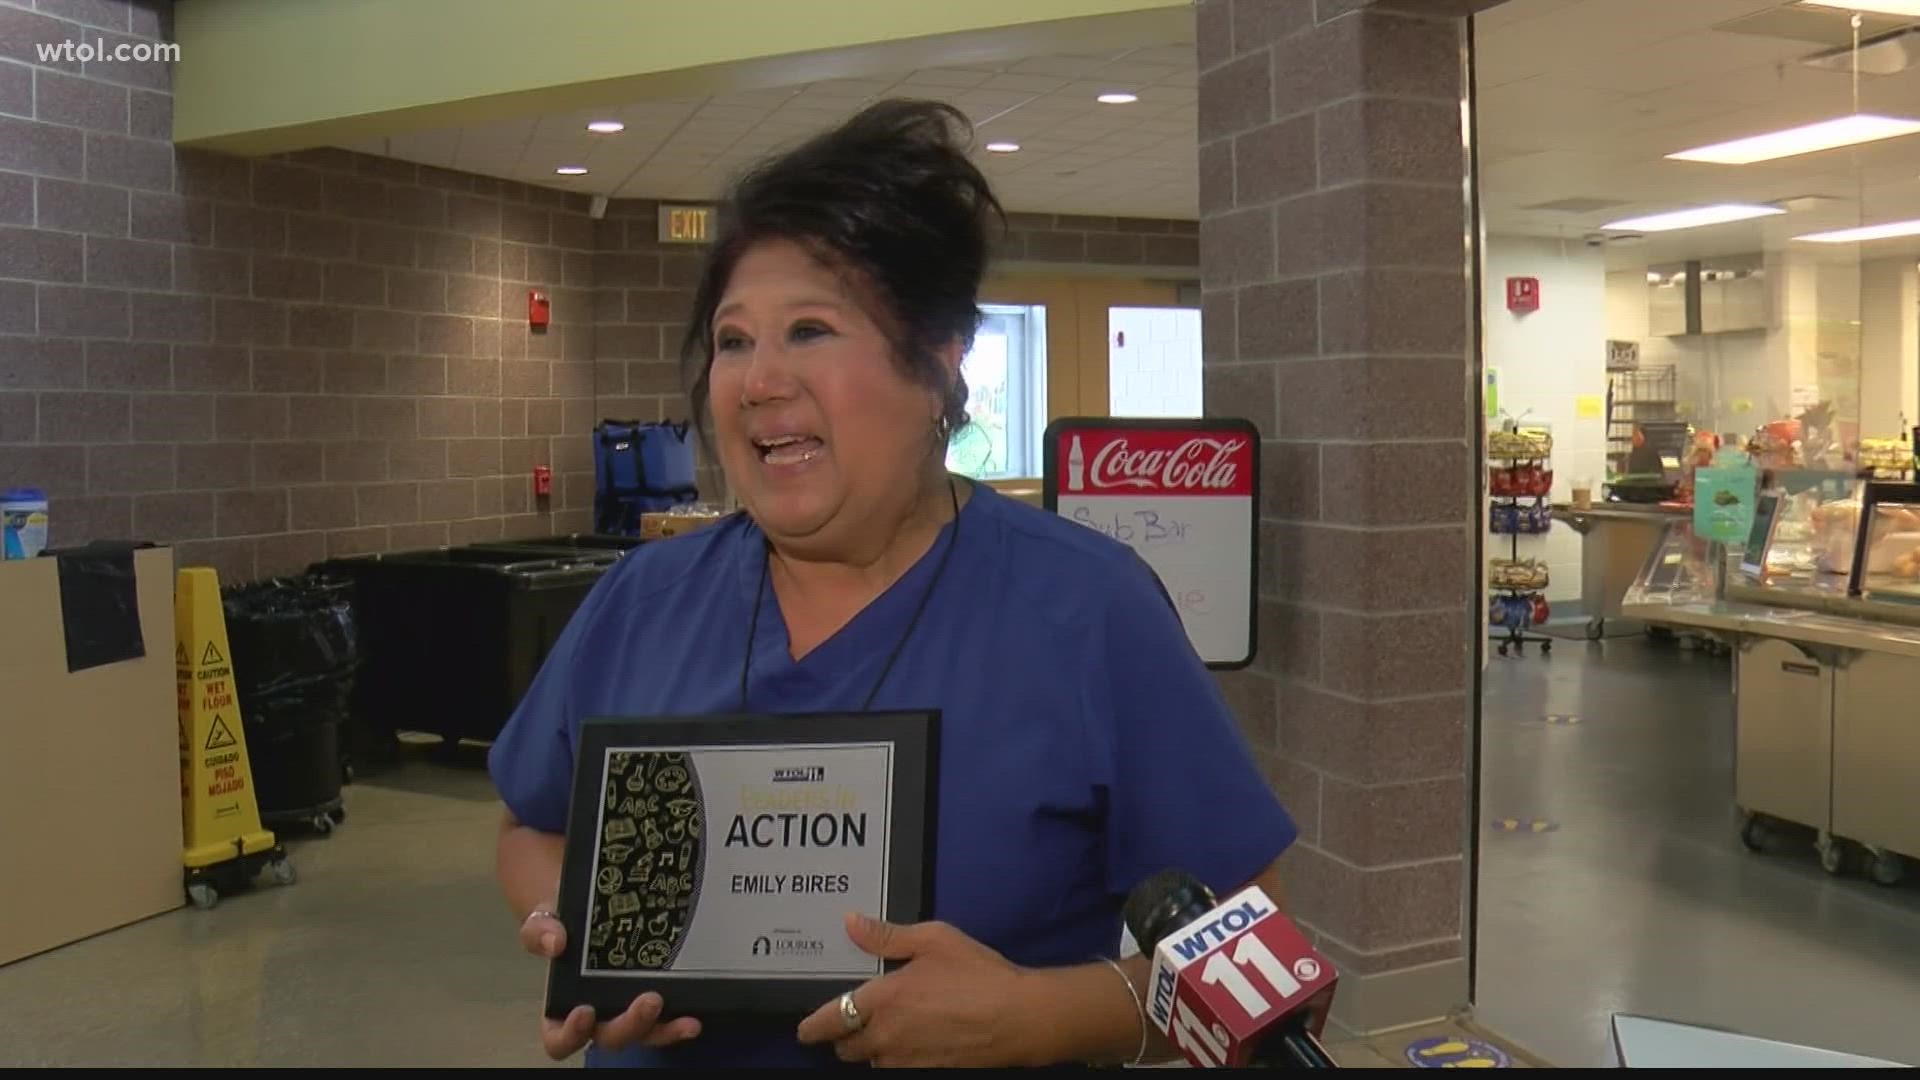 Northwood High Schools' Food Service Director Emily Bires is this week's Leader in Action! Thank you, Emily, for caring for every child you come in contact with!